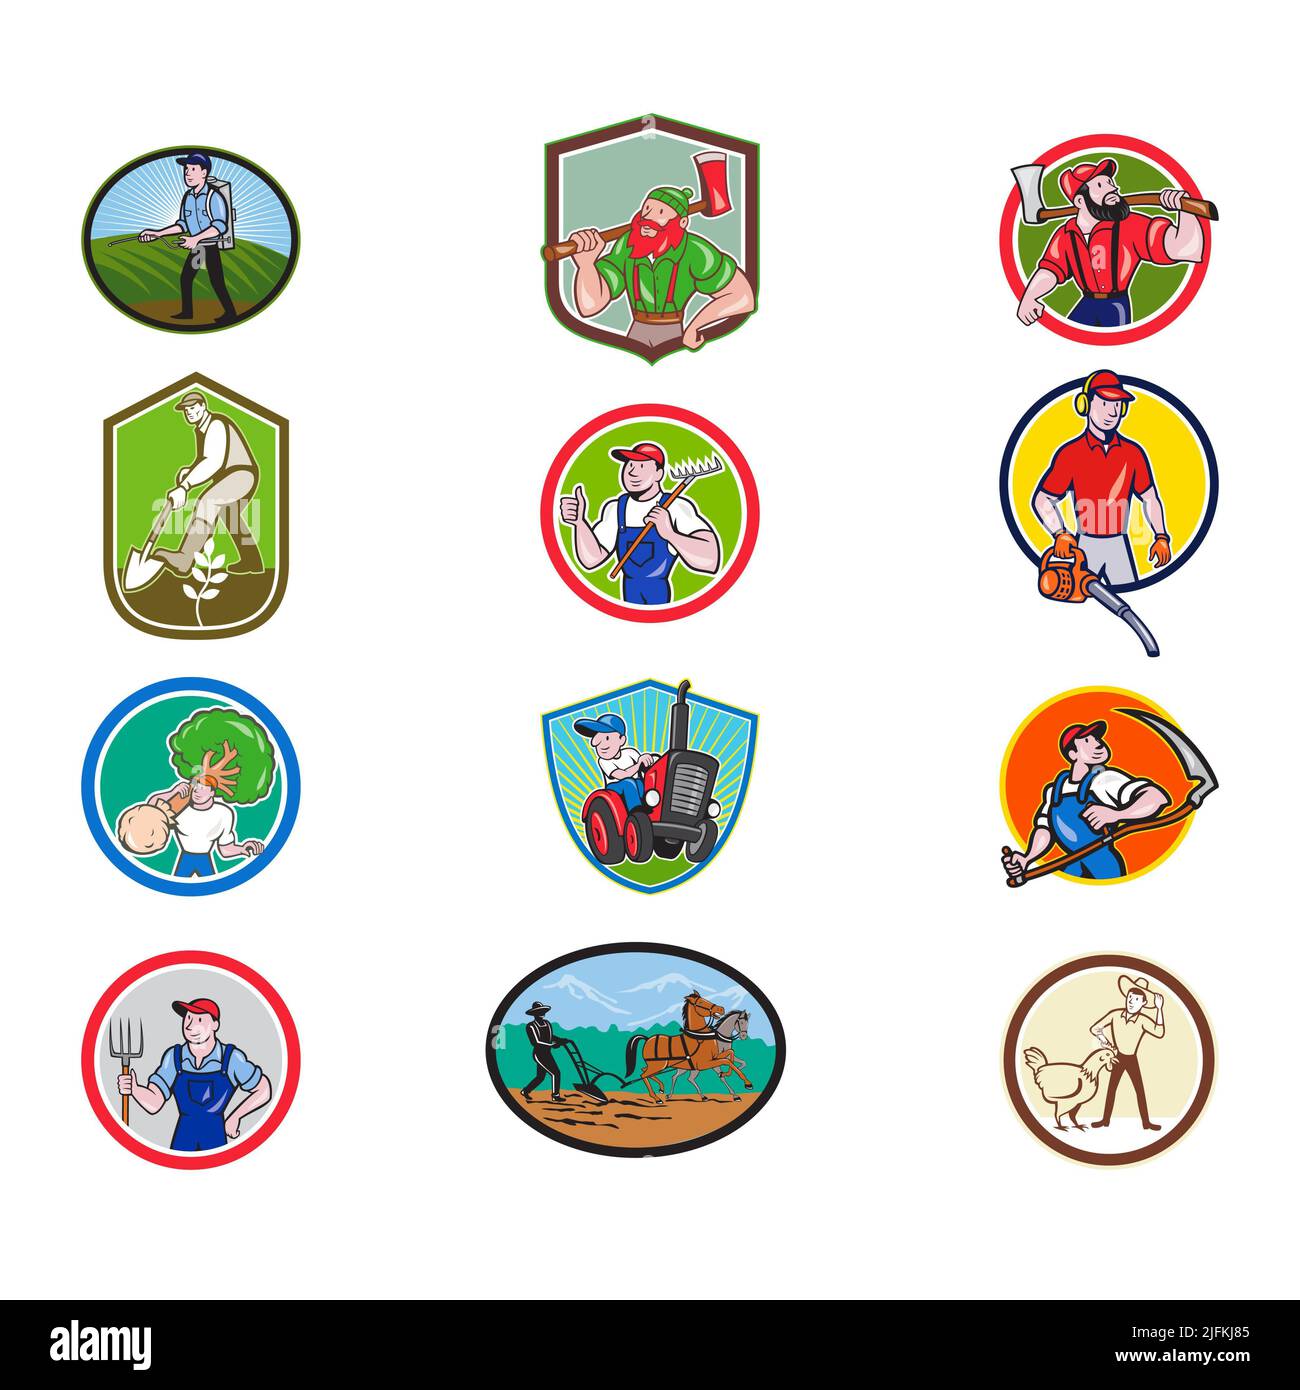 Set or collection of cartoon character mascot style illustration of farmer, gardener, agriculturist, horticulturist, landscaper, lumberjack set in Stock Photo